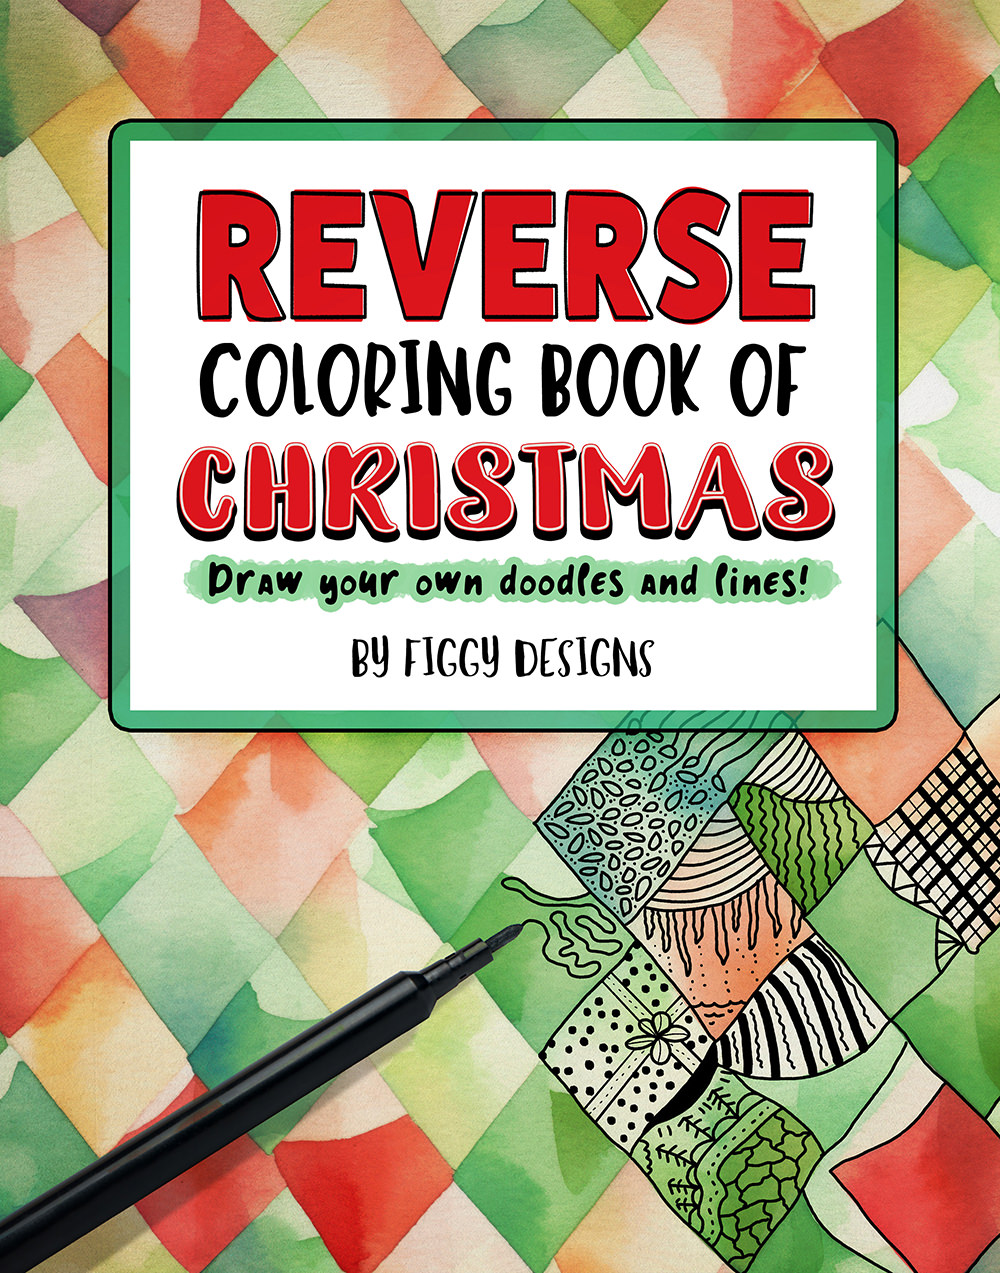 Reverse Coloring Book of Christmas